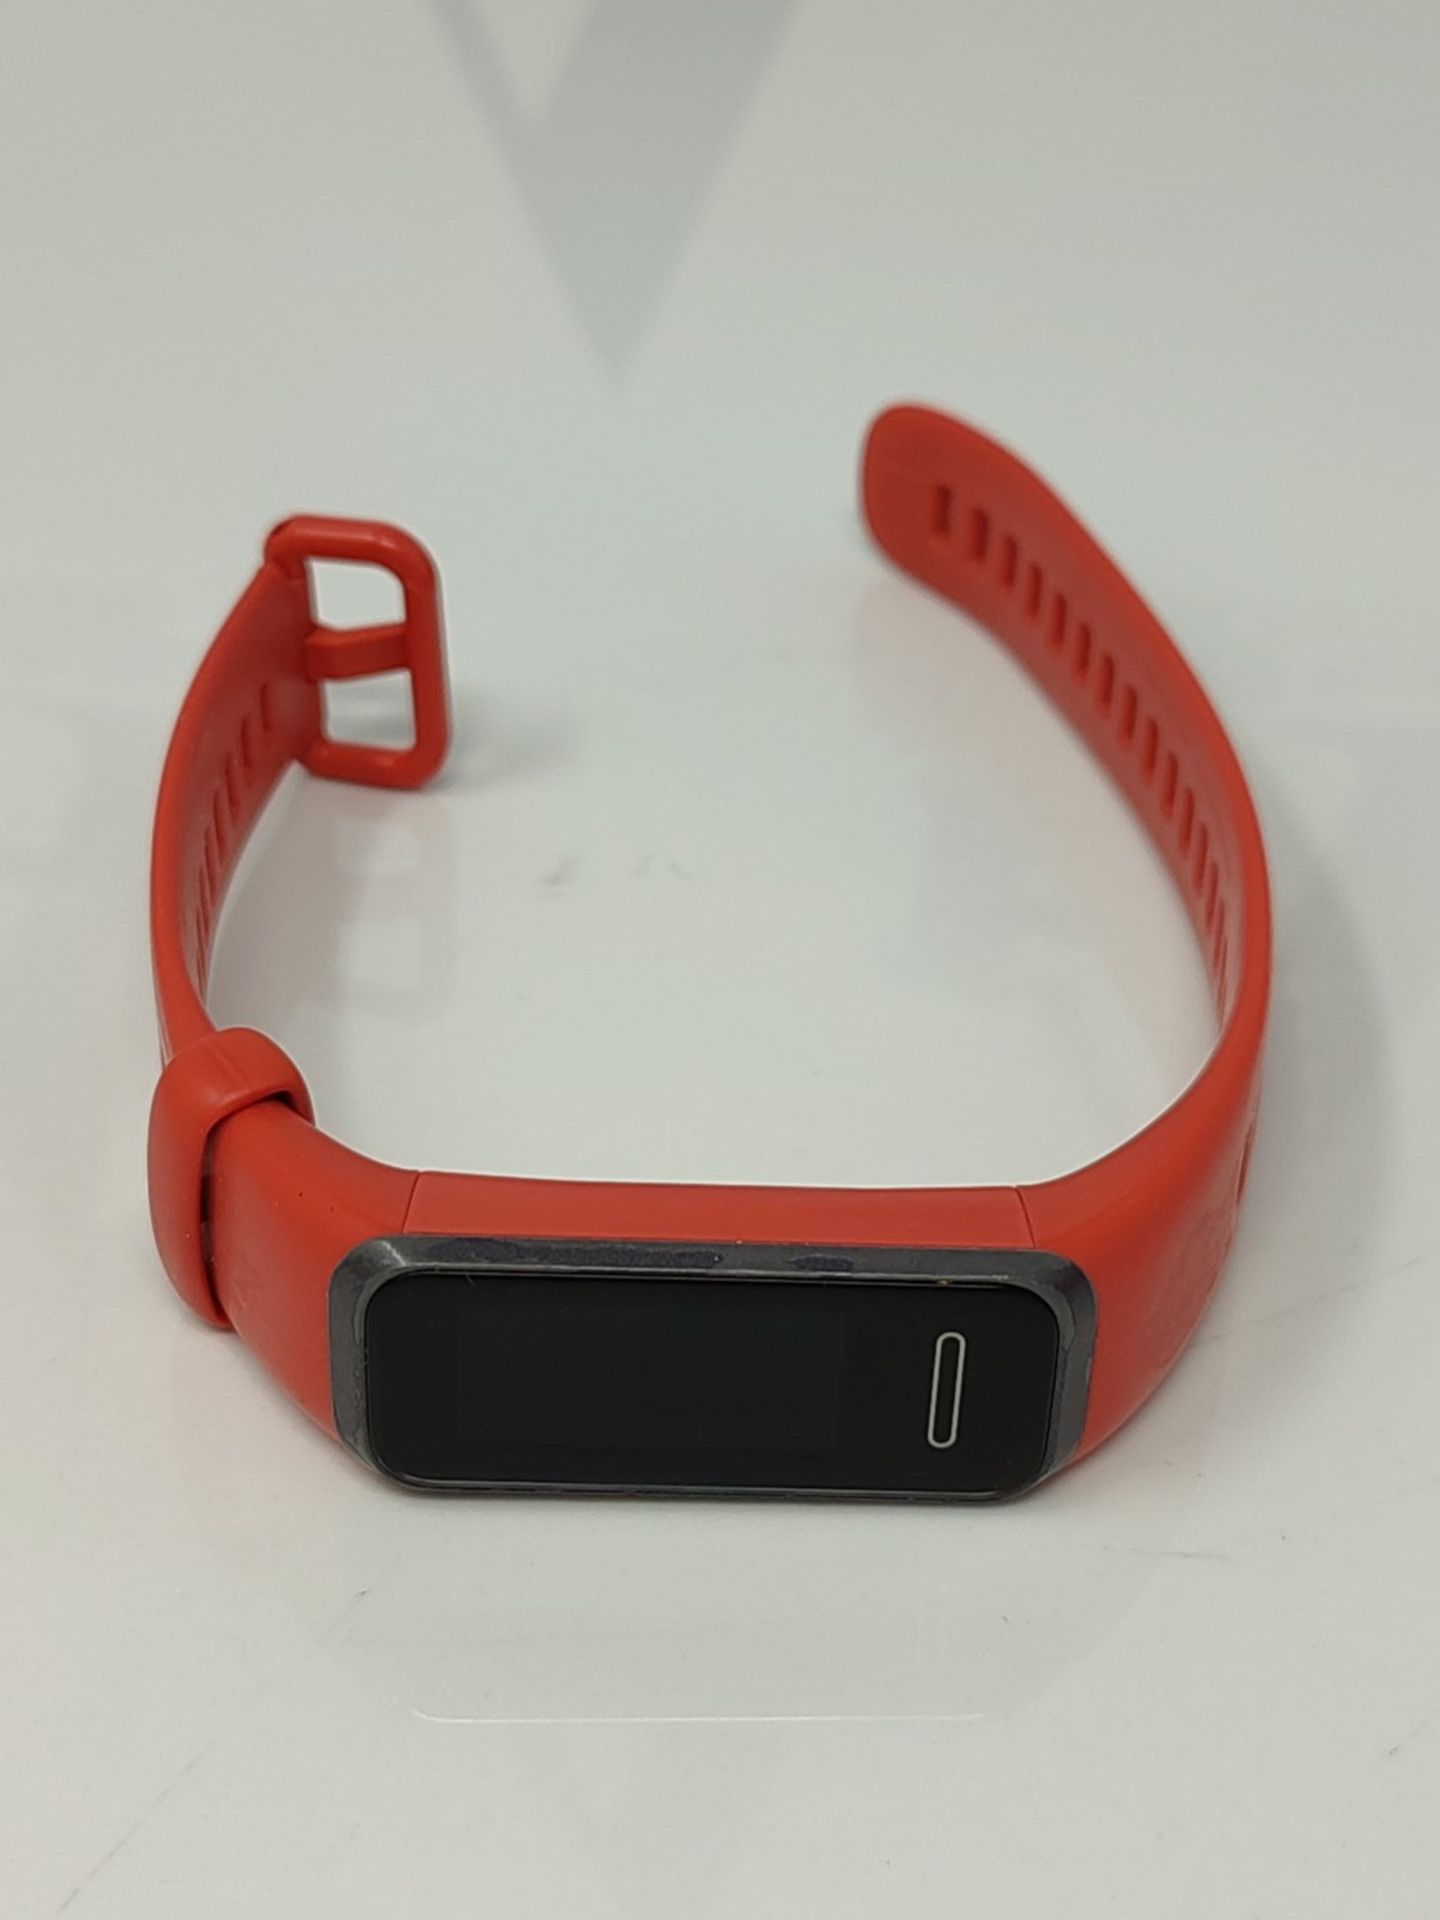 HUAWEI Band 4 Smart Band, Fitness Activities Tracker with 0.96" Color Screen, 24/7 Con - Bild 2 aus 3